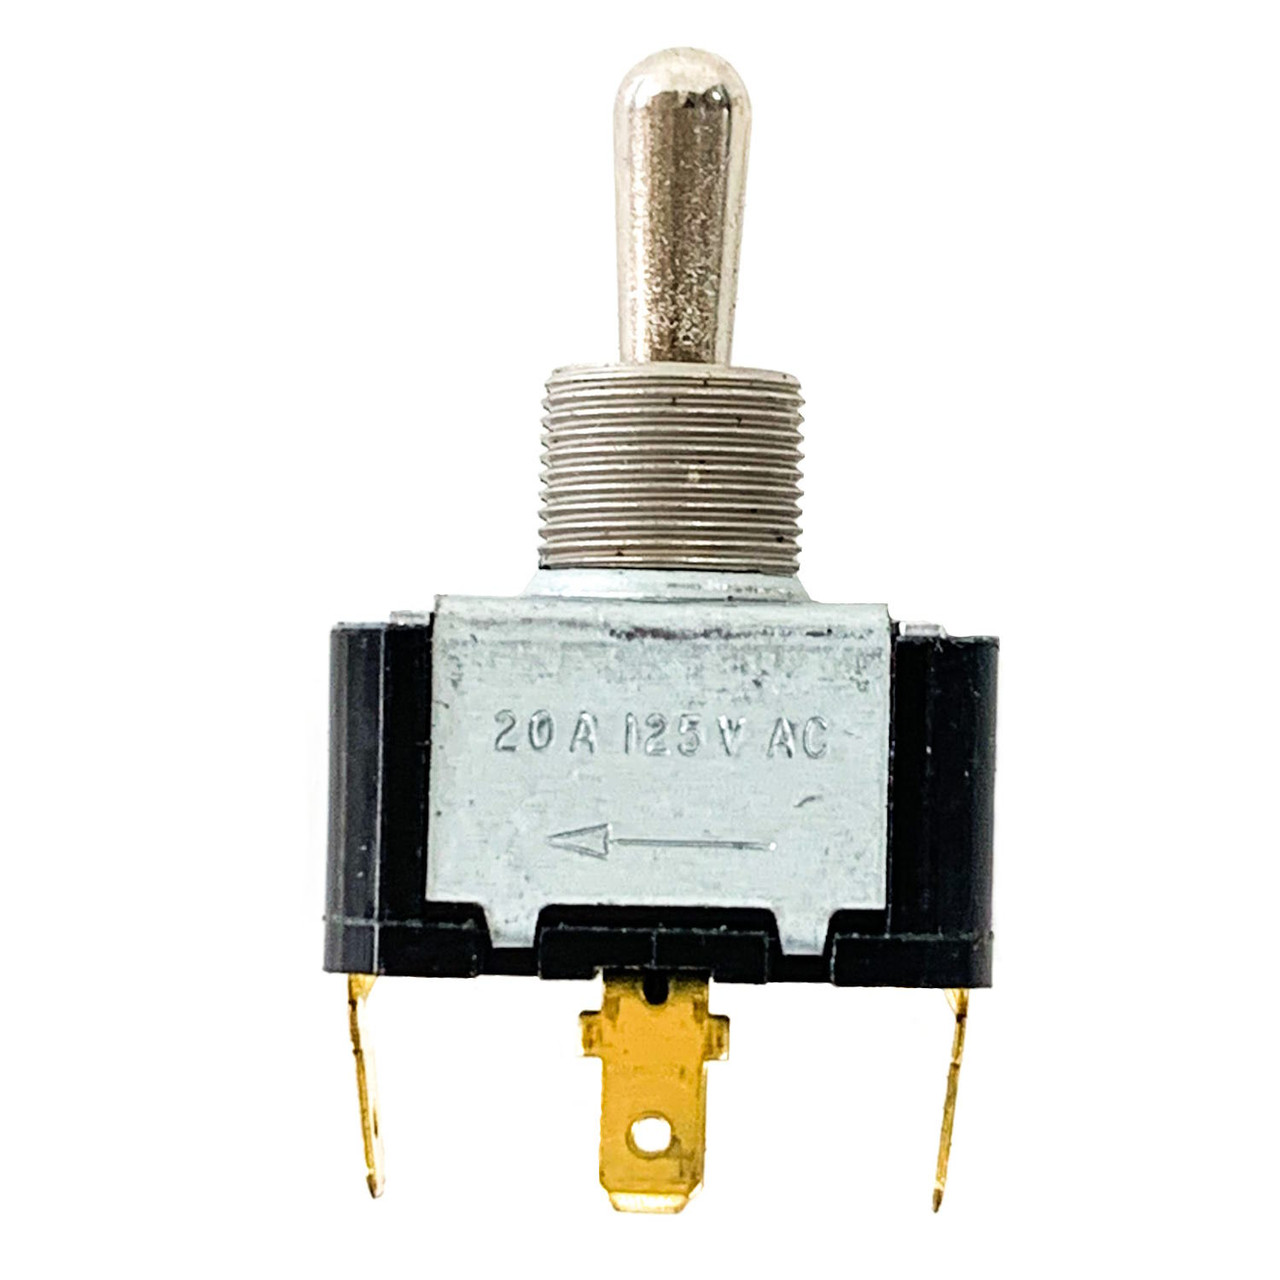 Eaton 3 Position Toggle Switch (OFF-ON-ON) or when using the heat gun (OFF-COLD-HOT)